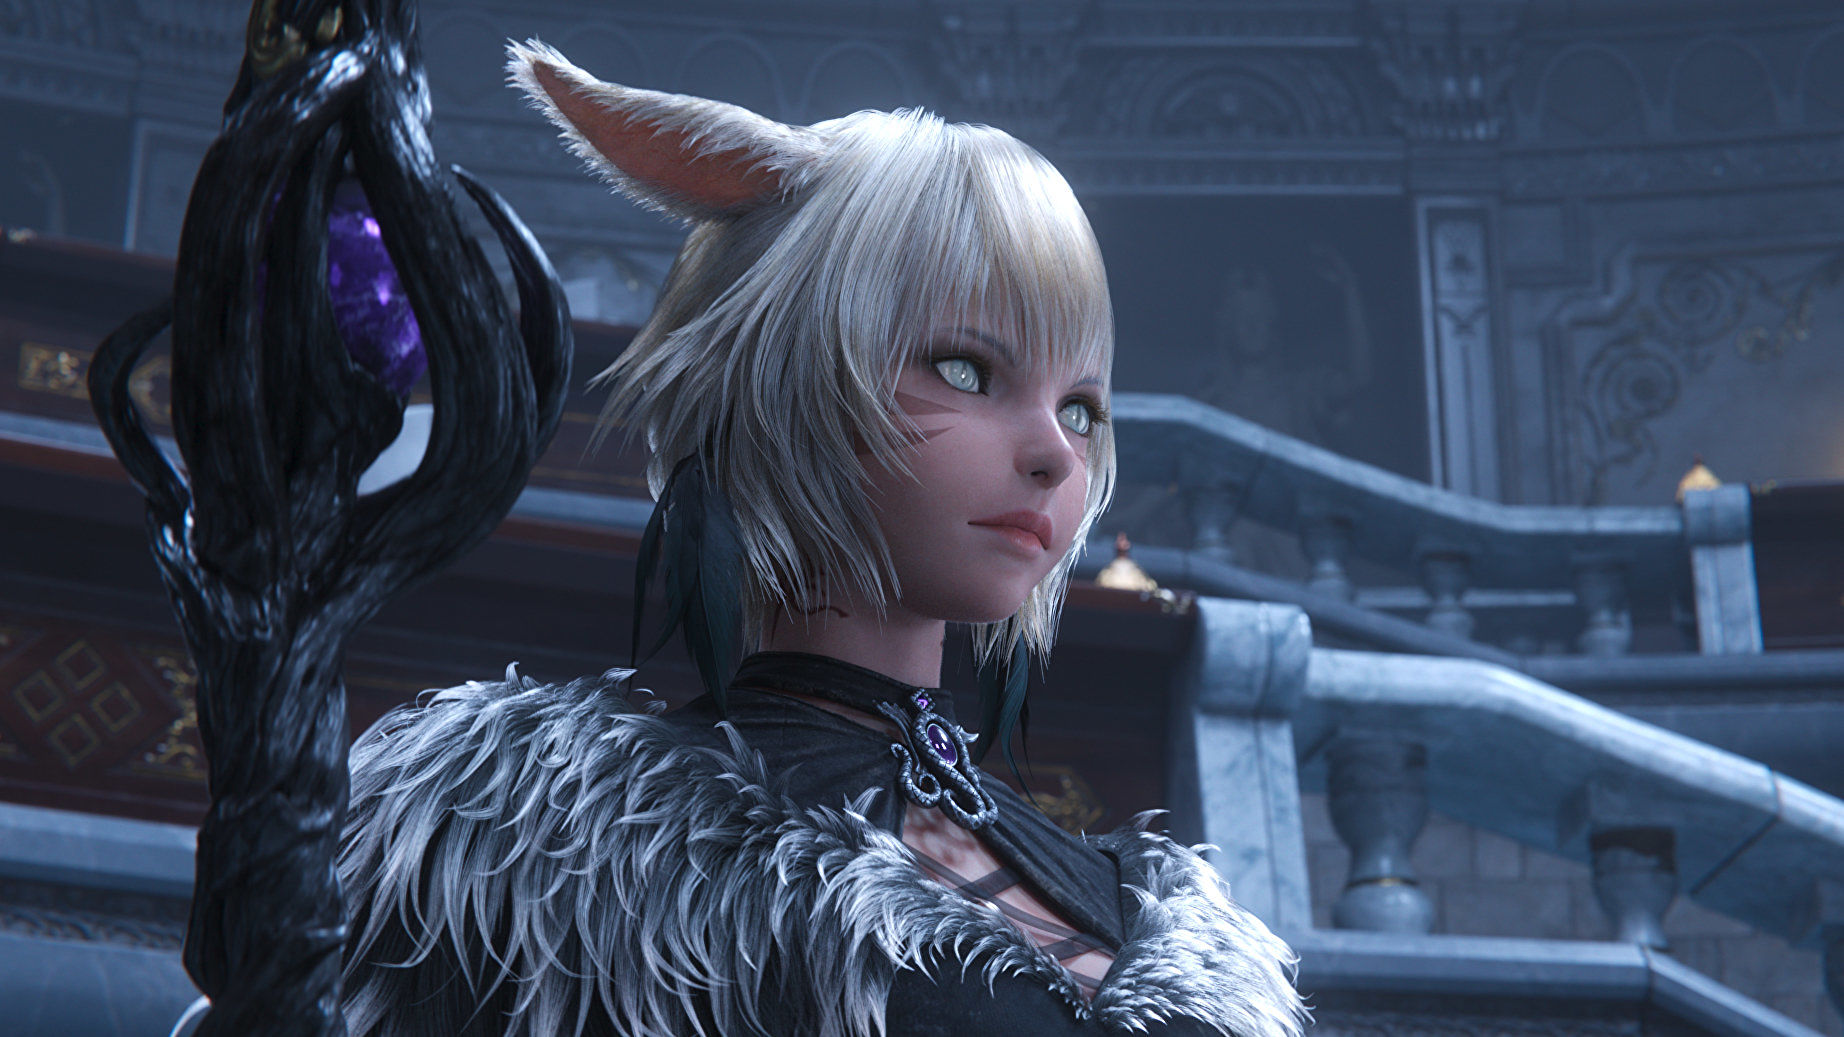 final-fantasy-xiv-will-continue-its-story-and-become-easier-for-solo-players-on-april-12th